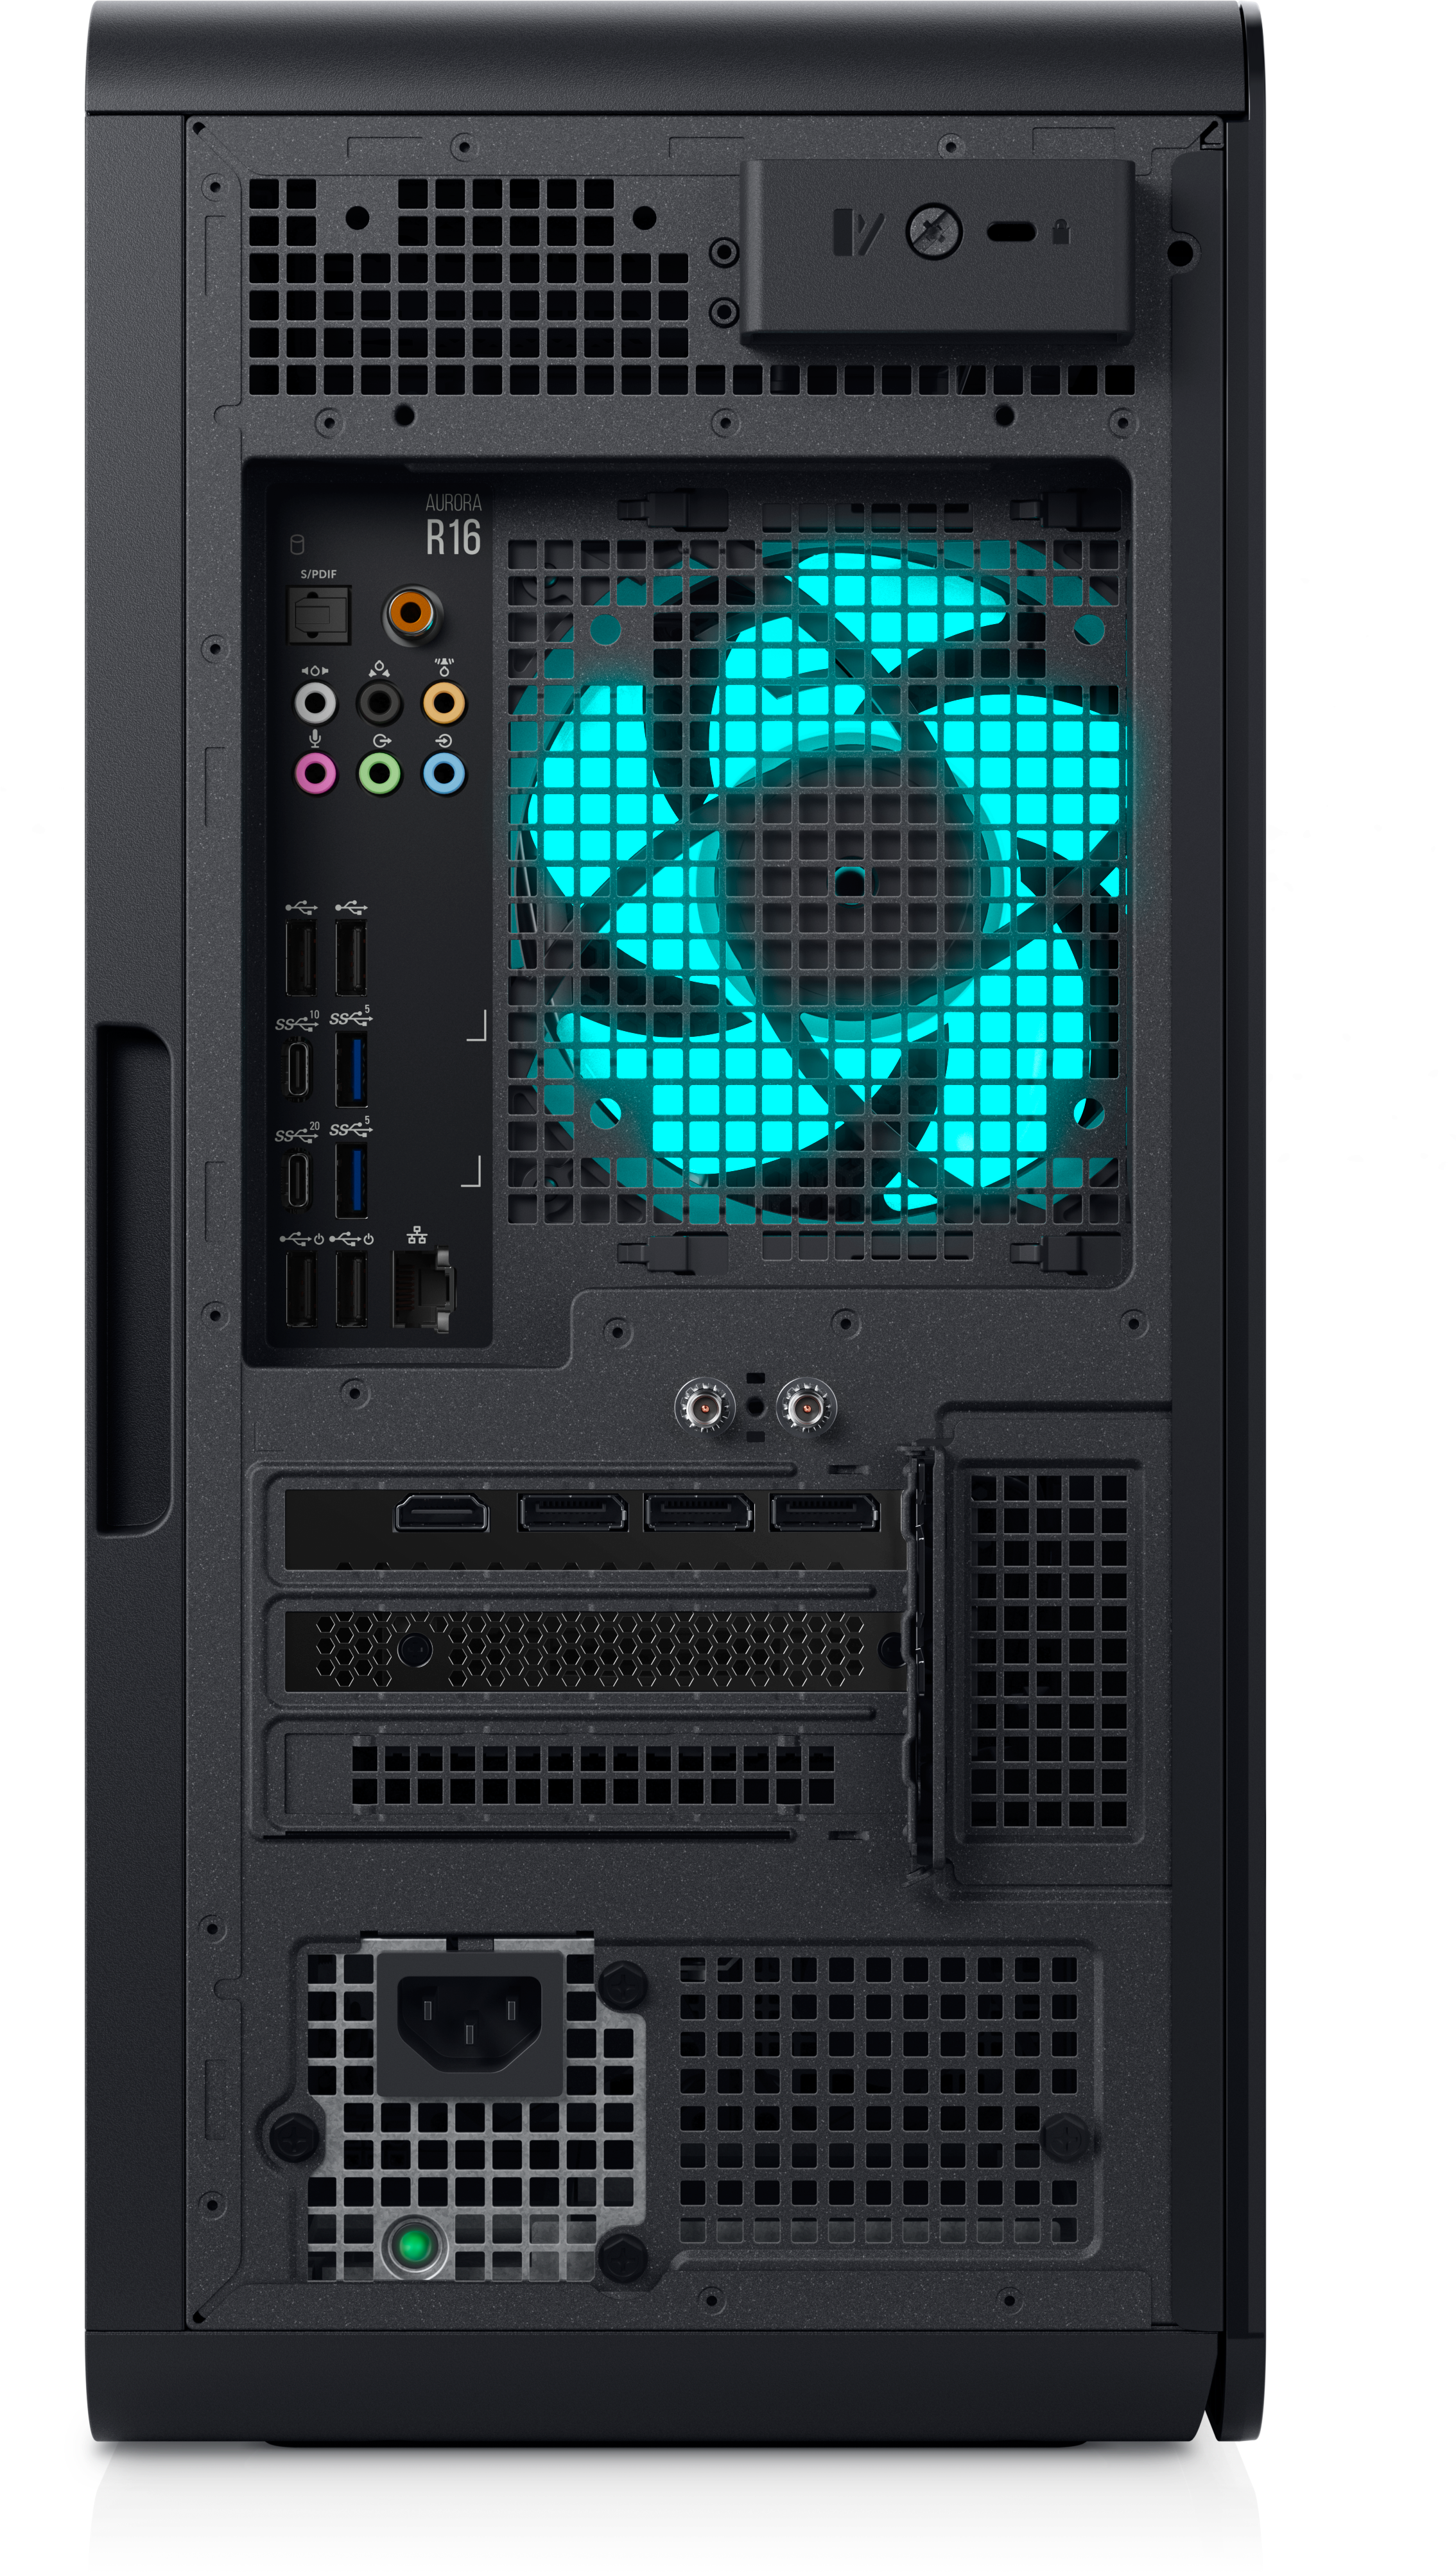 Alienware R16 Gaming Desktop with Air Cooling u0026 Liquid Cooling | Dell USA